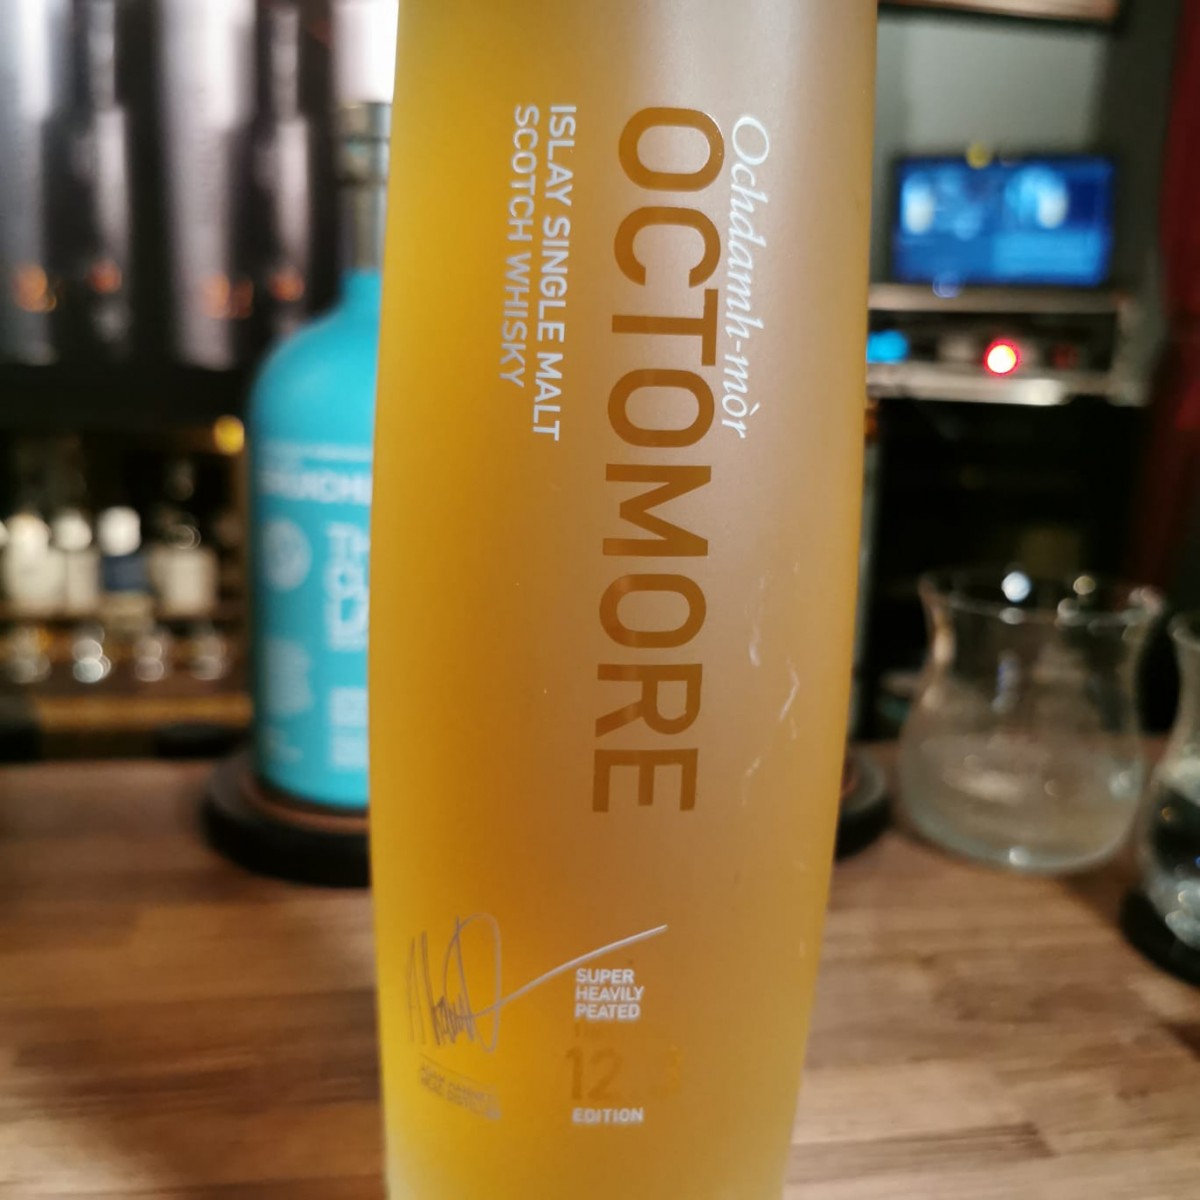 Octomore 12.3 whisky